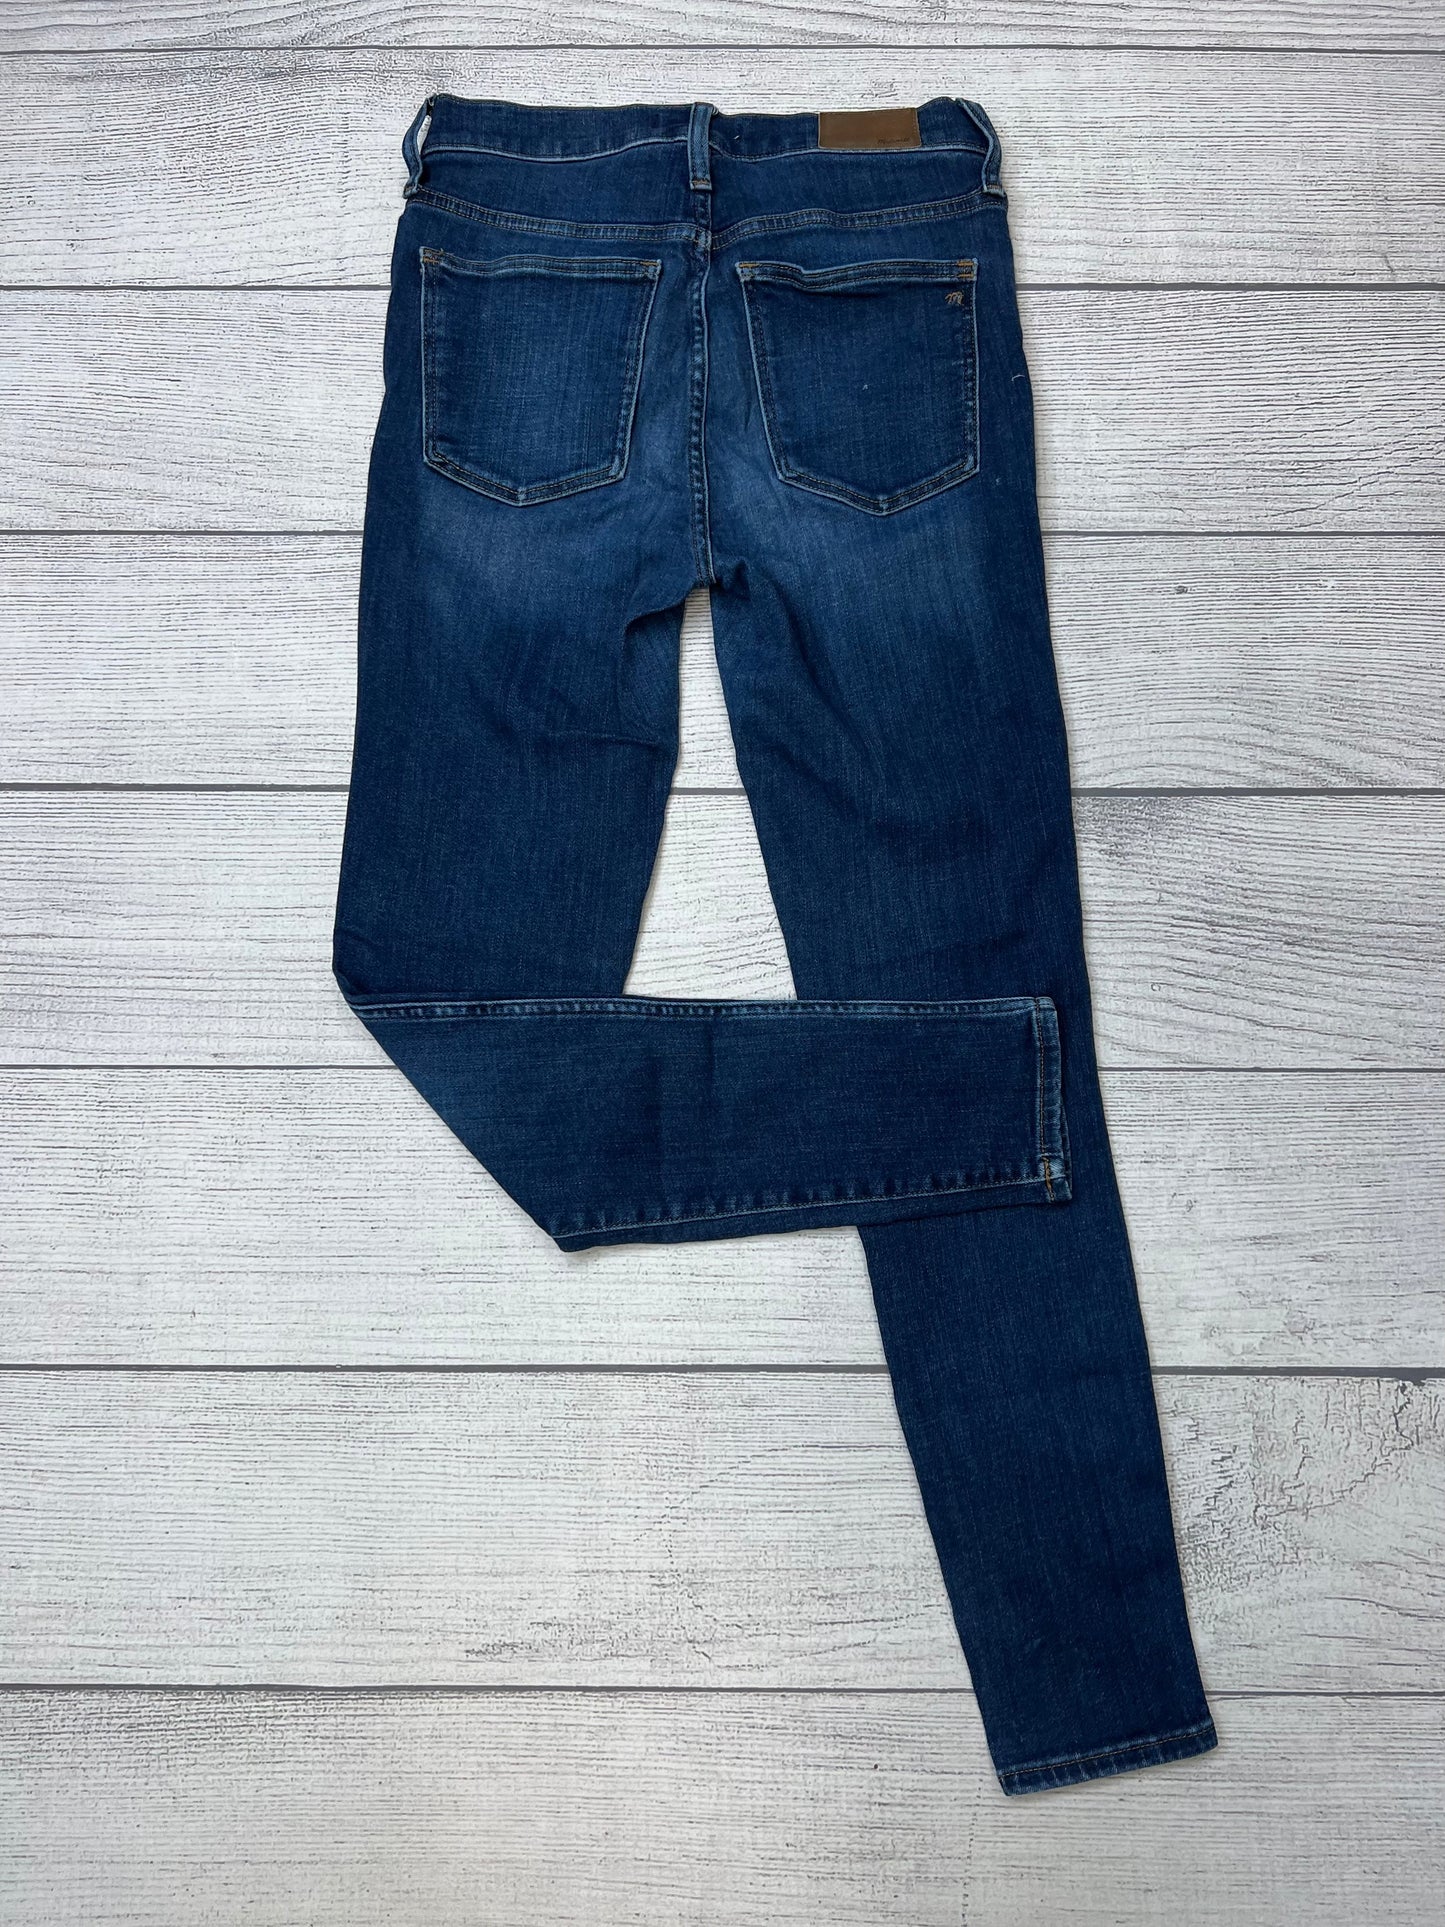 Jeans Designer By Madewell  Size: 6